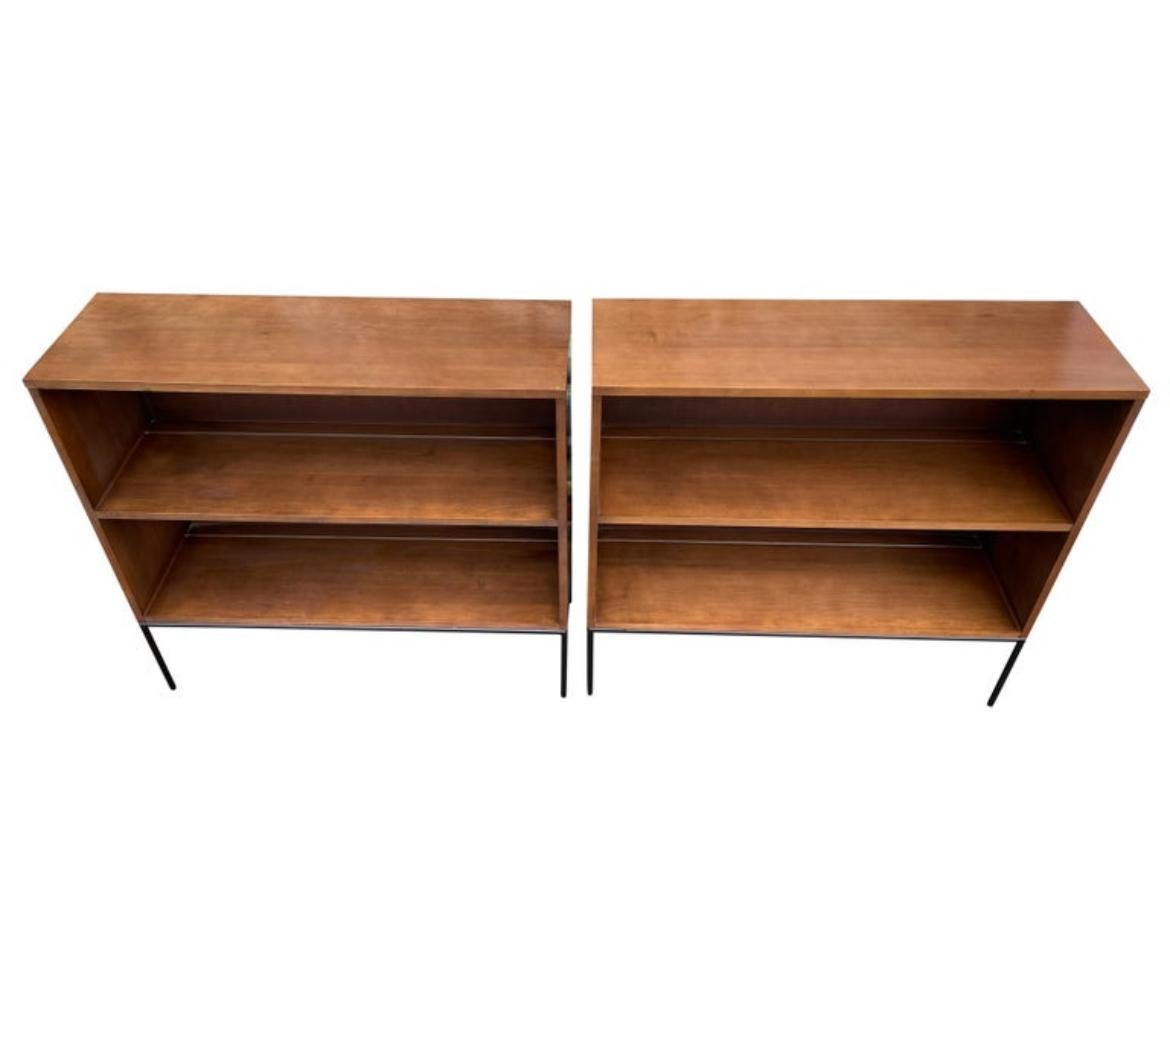 Pair of vintage midcentury Paul McCobb single high bookcases bookshelves #1516 original walnut finish over solid maple with black iron 4 leg base. Beautiful bookcase set by Paul McCobb, circa 1950s Planner Group, single center fixed shelf - all